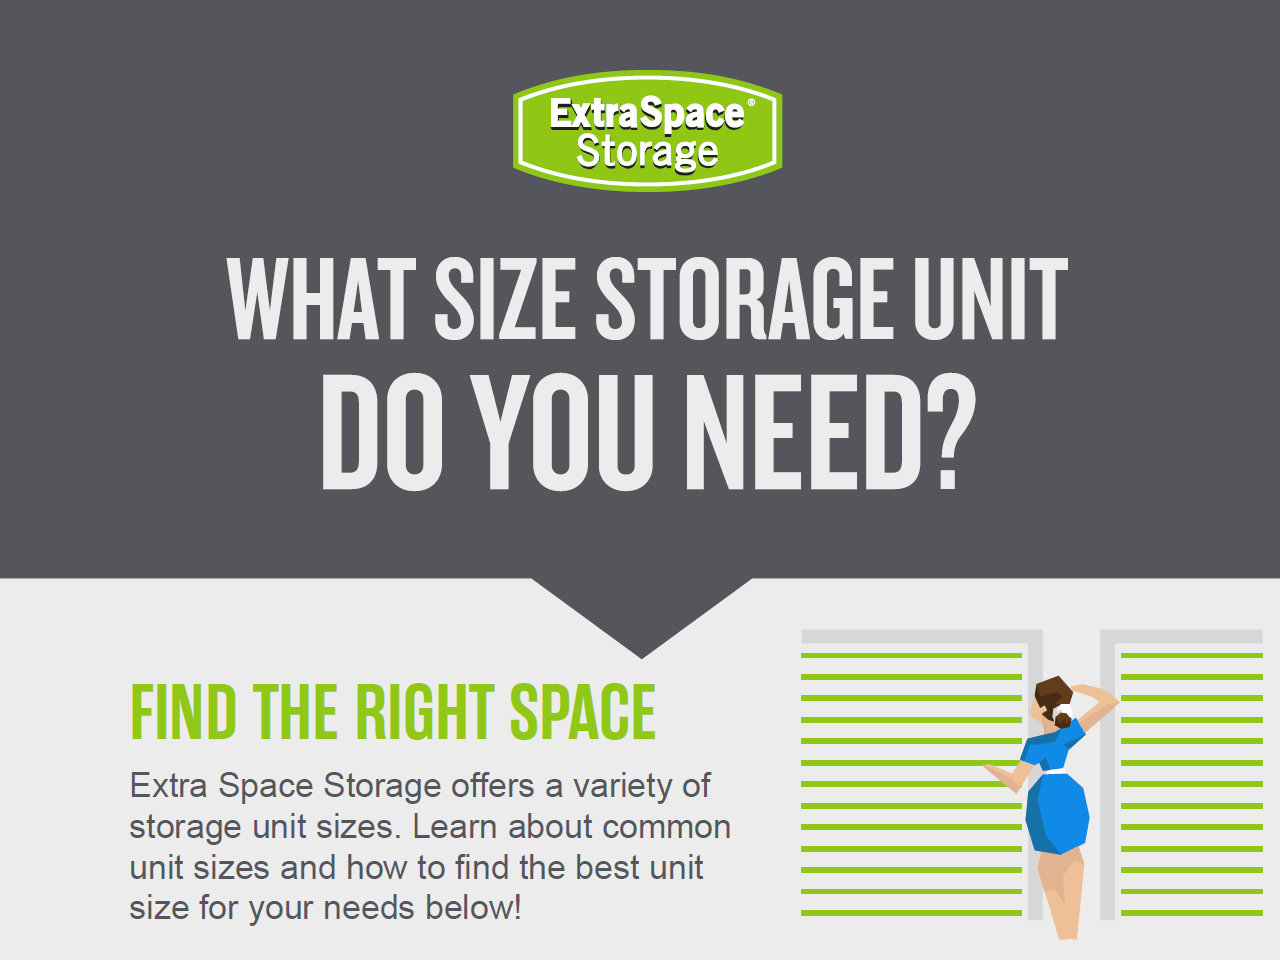 https://images.ctfassets.net/fynvlmu126fq/6b7ku2V40HSBwyH3tYrBl8/f7734deb20963536fdcc2c6a2a8fca6a/self-storage-size-guide-infographic-preview-image.png